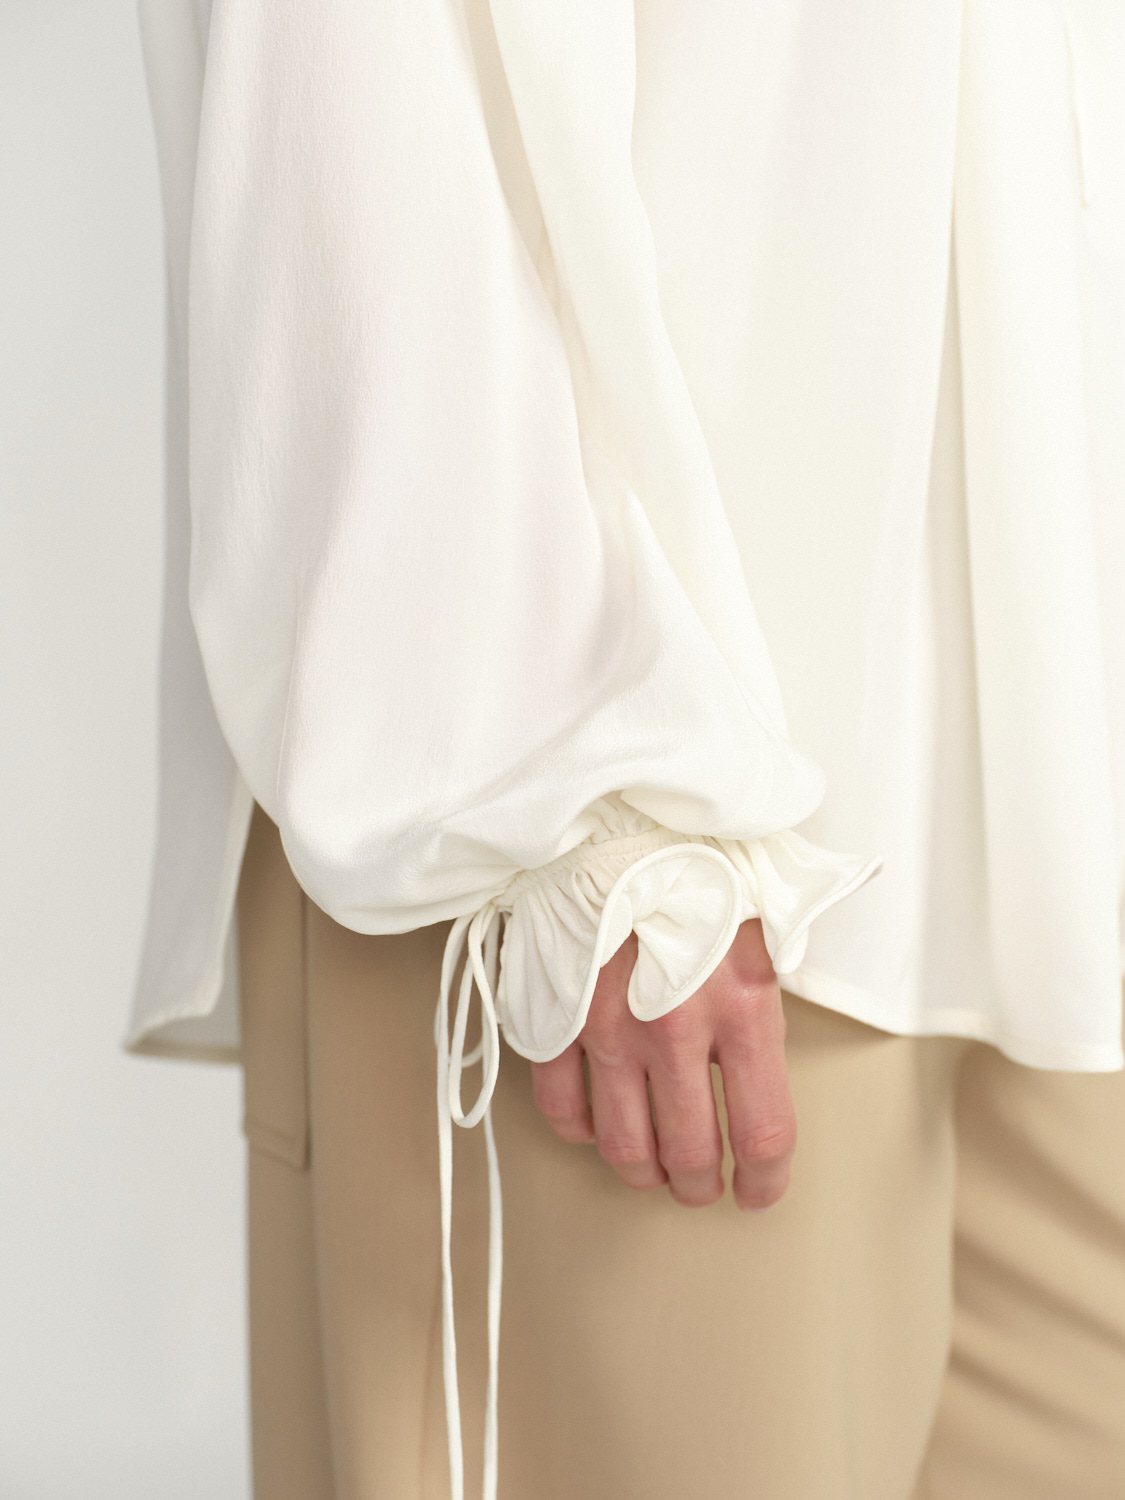 Victoria Beckham Ruched Detail Blouse - Long Sleeve Blouse with Ruched Details made of Silk white 38